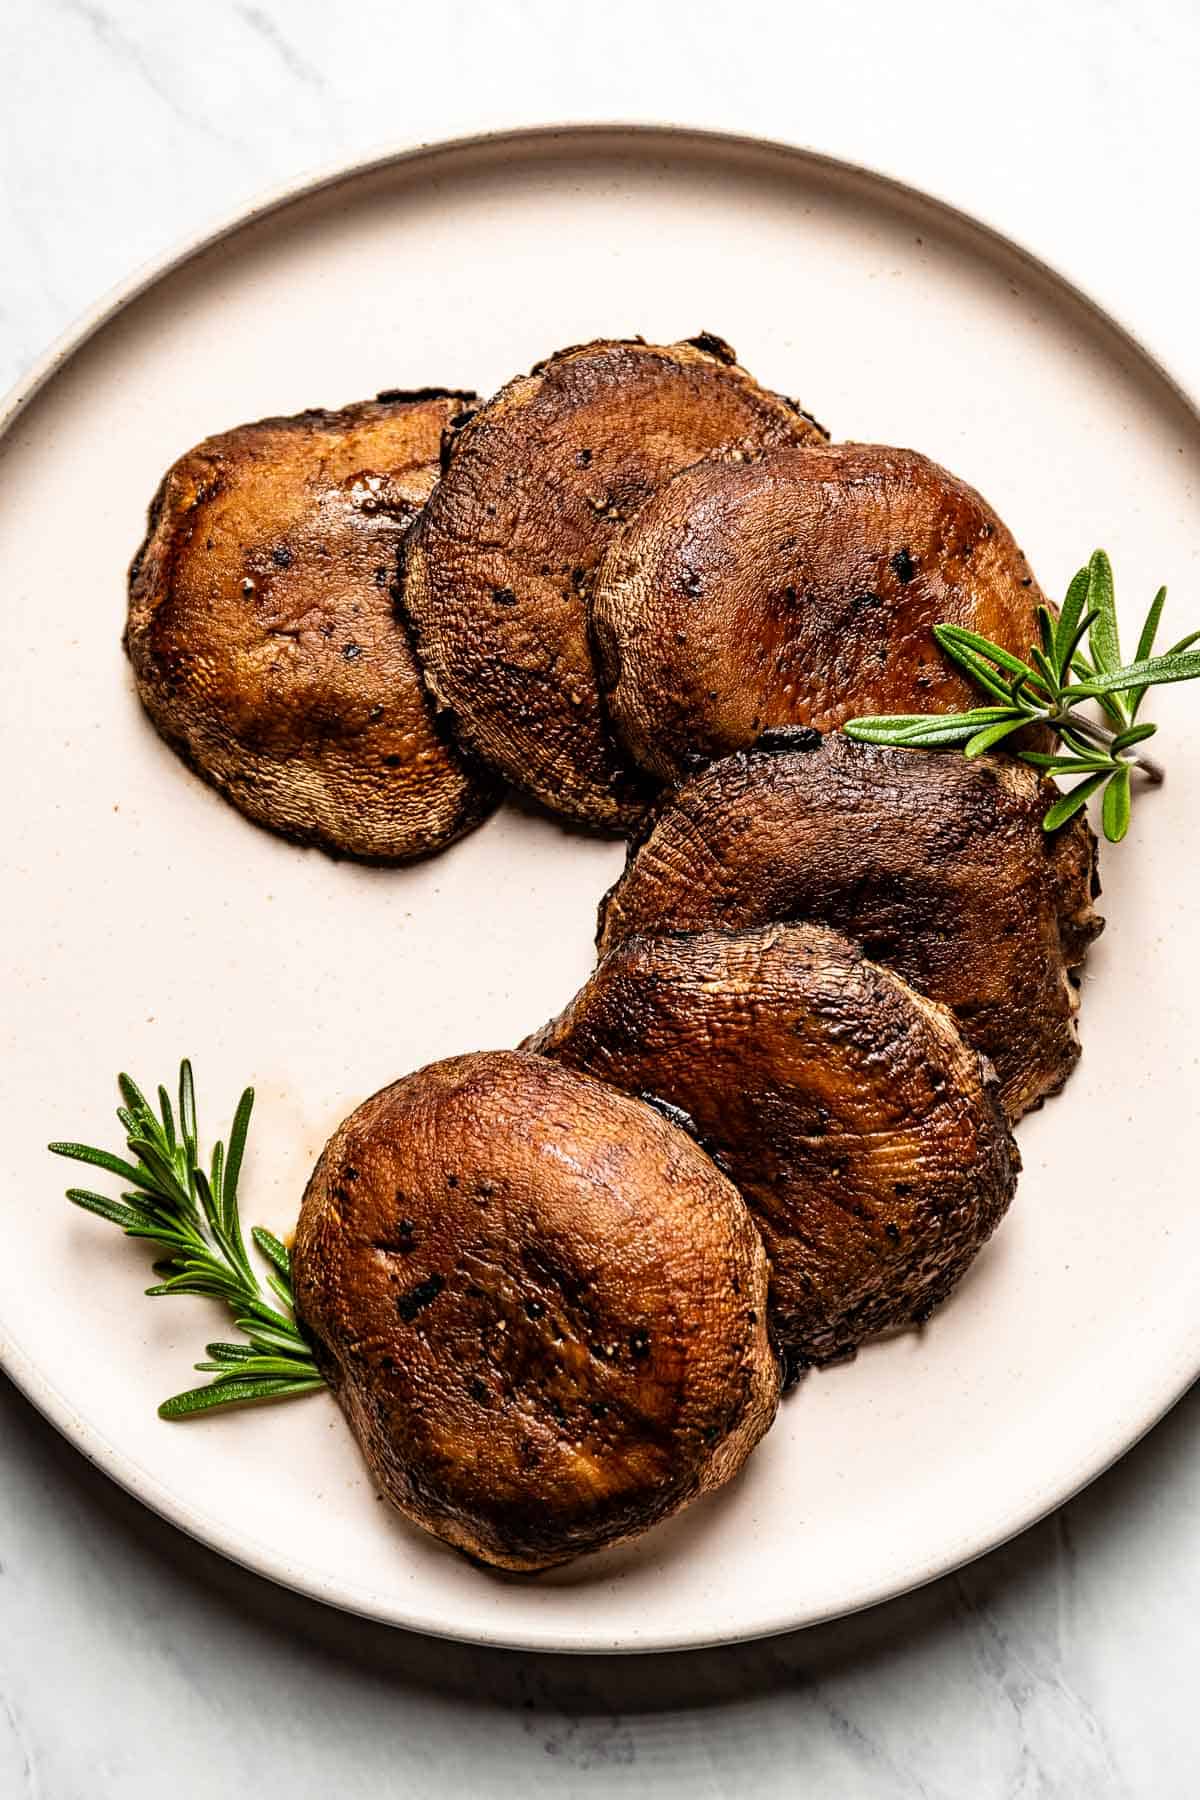 Roasted portobello mushrooms on a plate garnished with rosemary